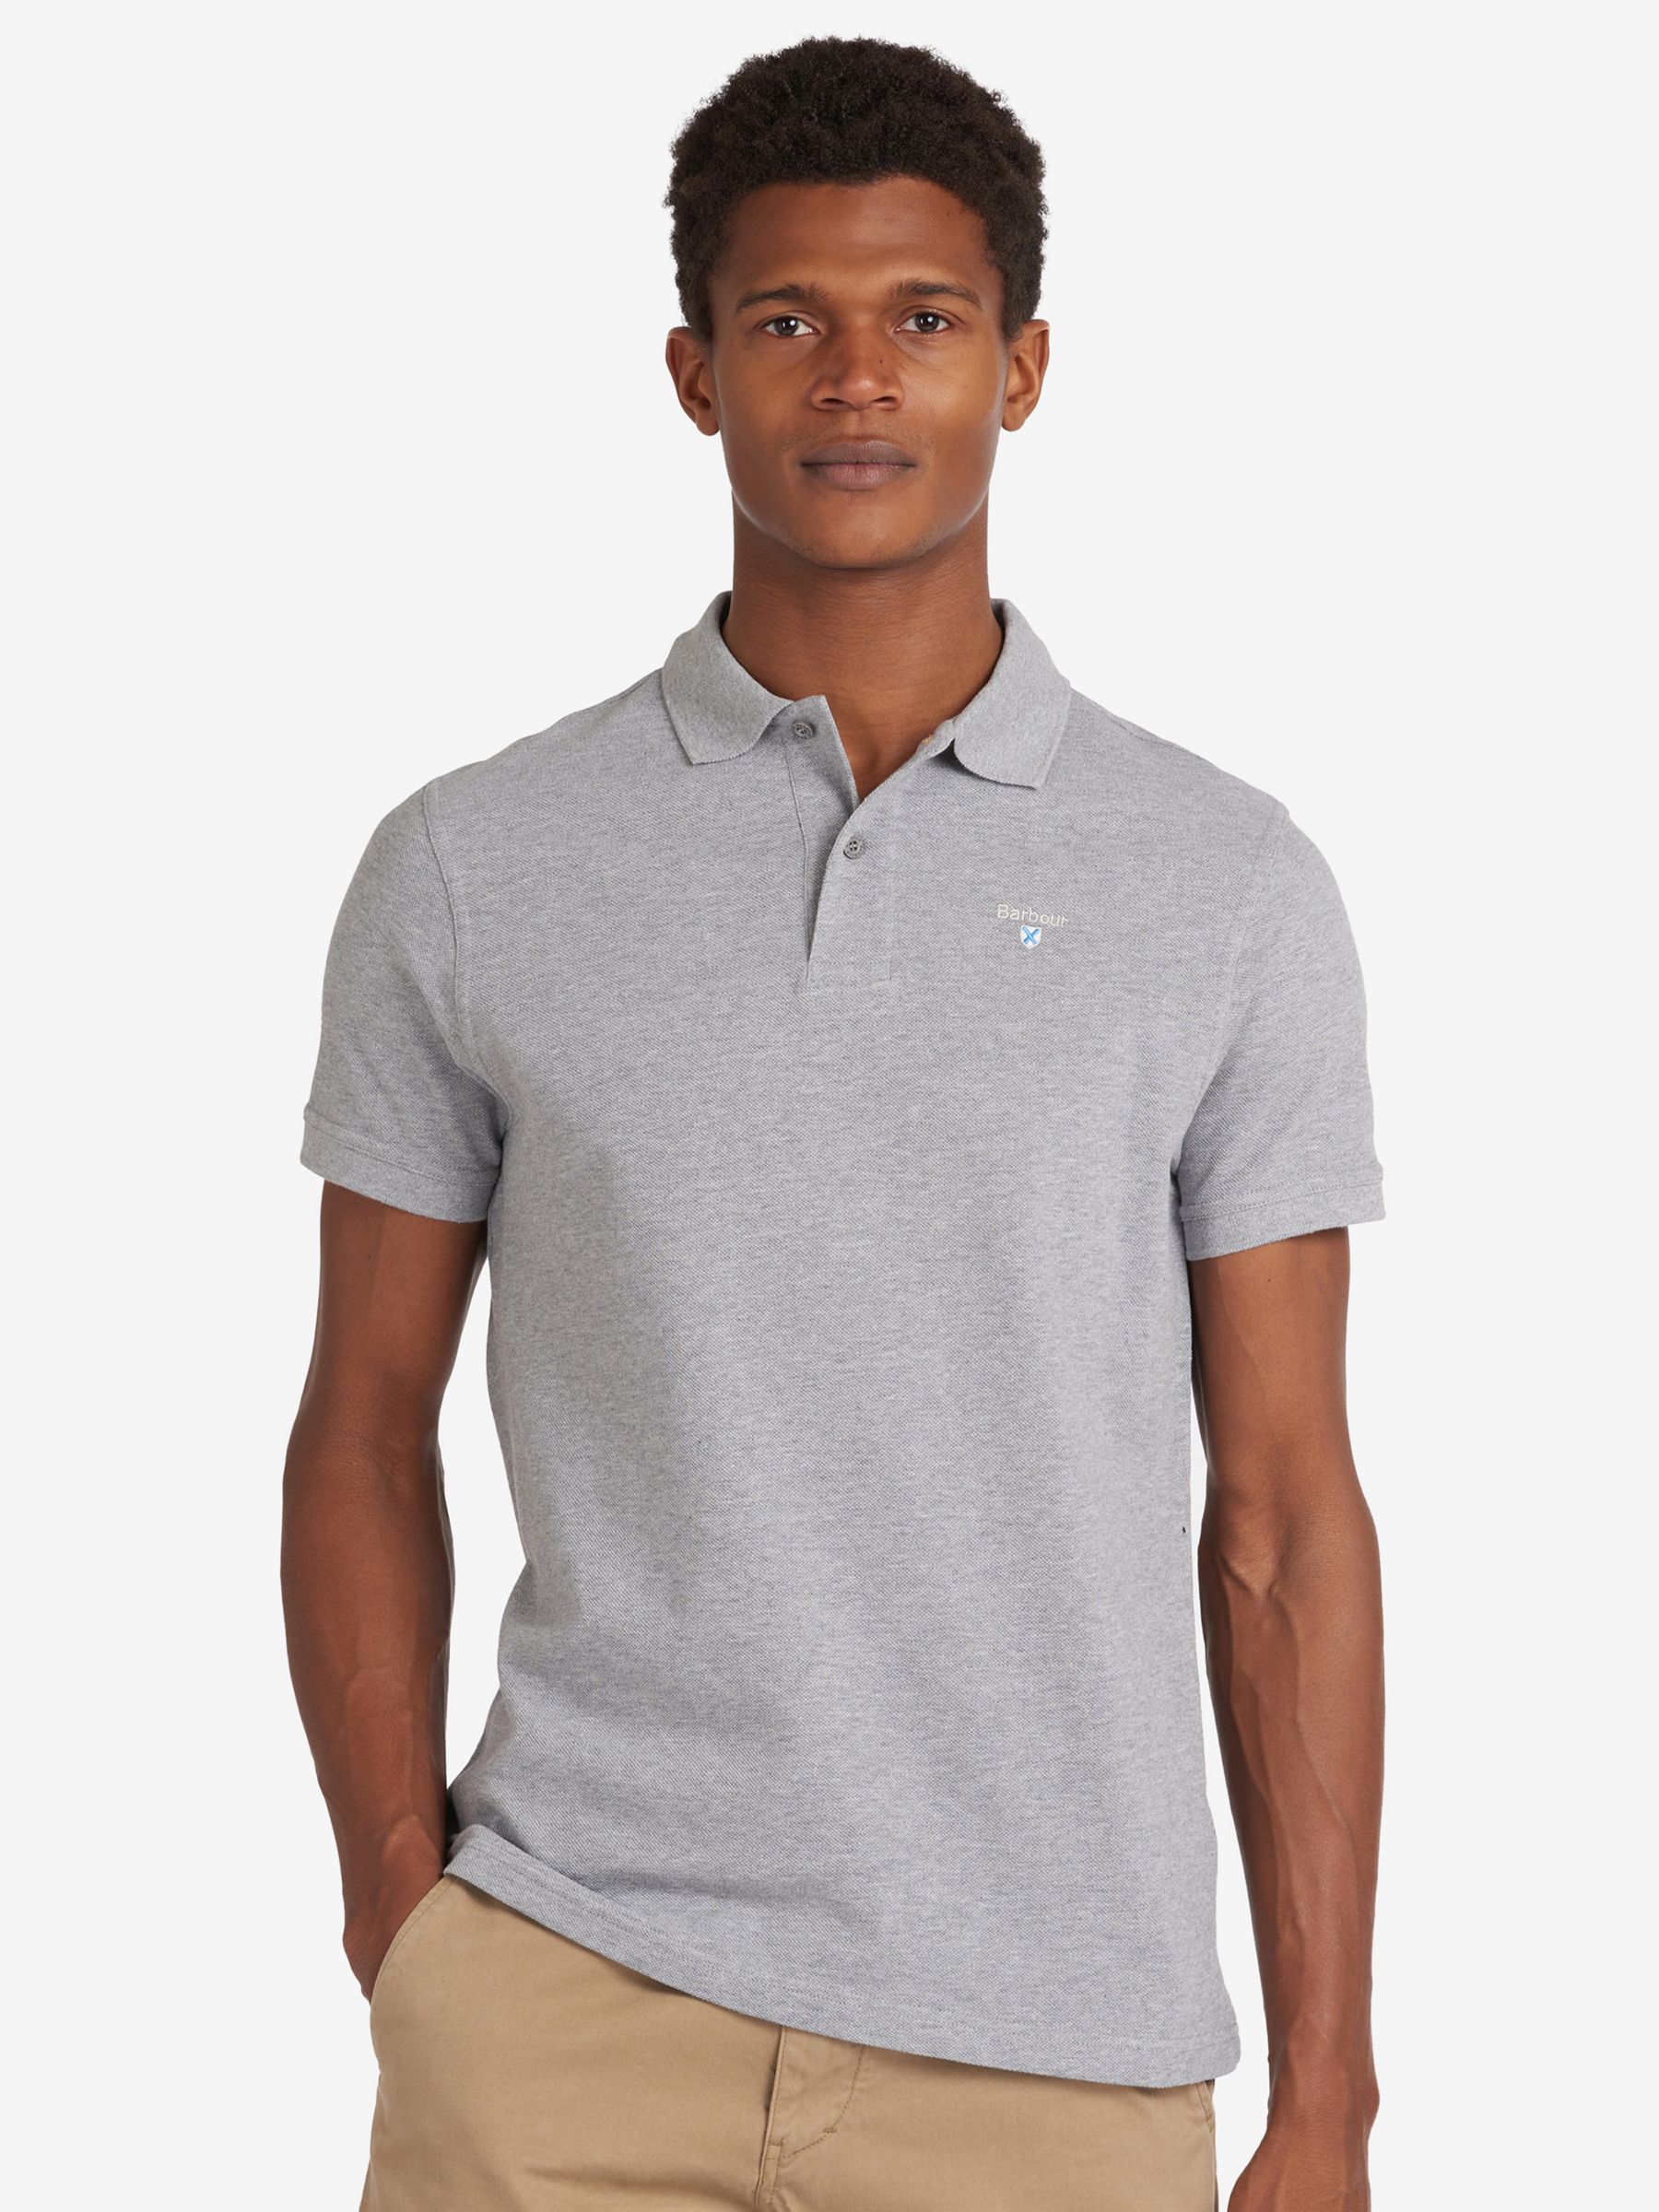 Barbour Short Sleeve Sports Polo Shirt, Grey Marl, S